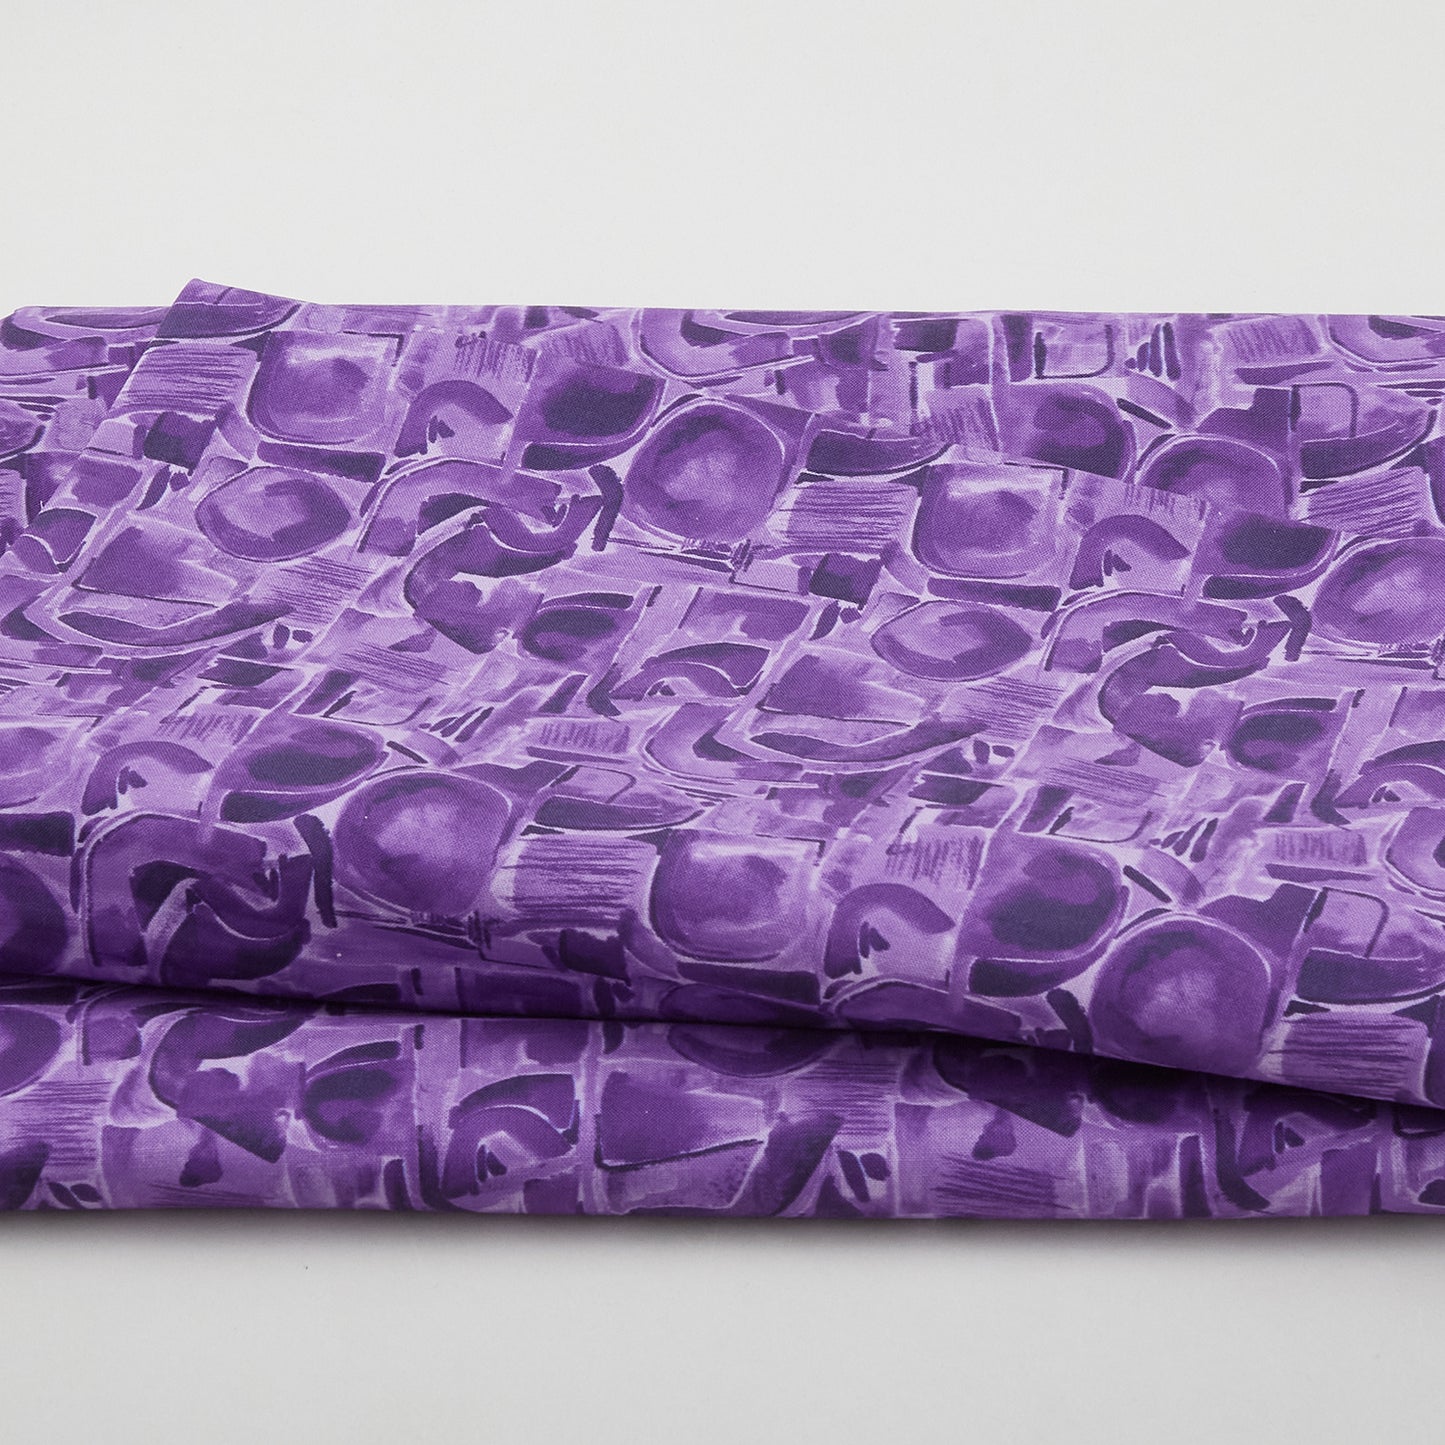 Spectral - Abstract Shapes Purple 118" Wide 3 Yard Cut Primary Image